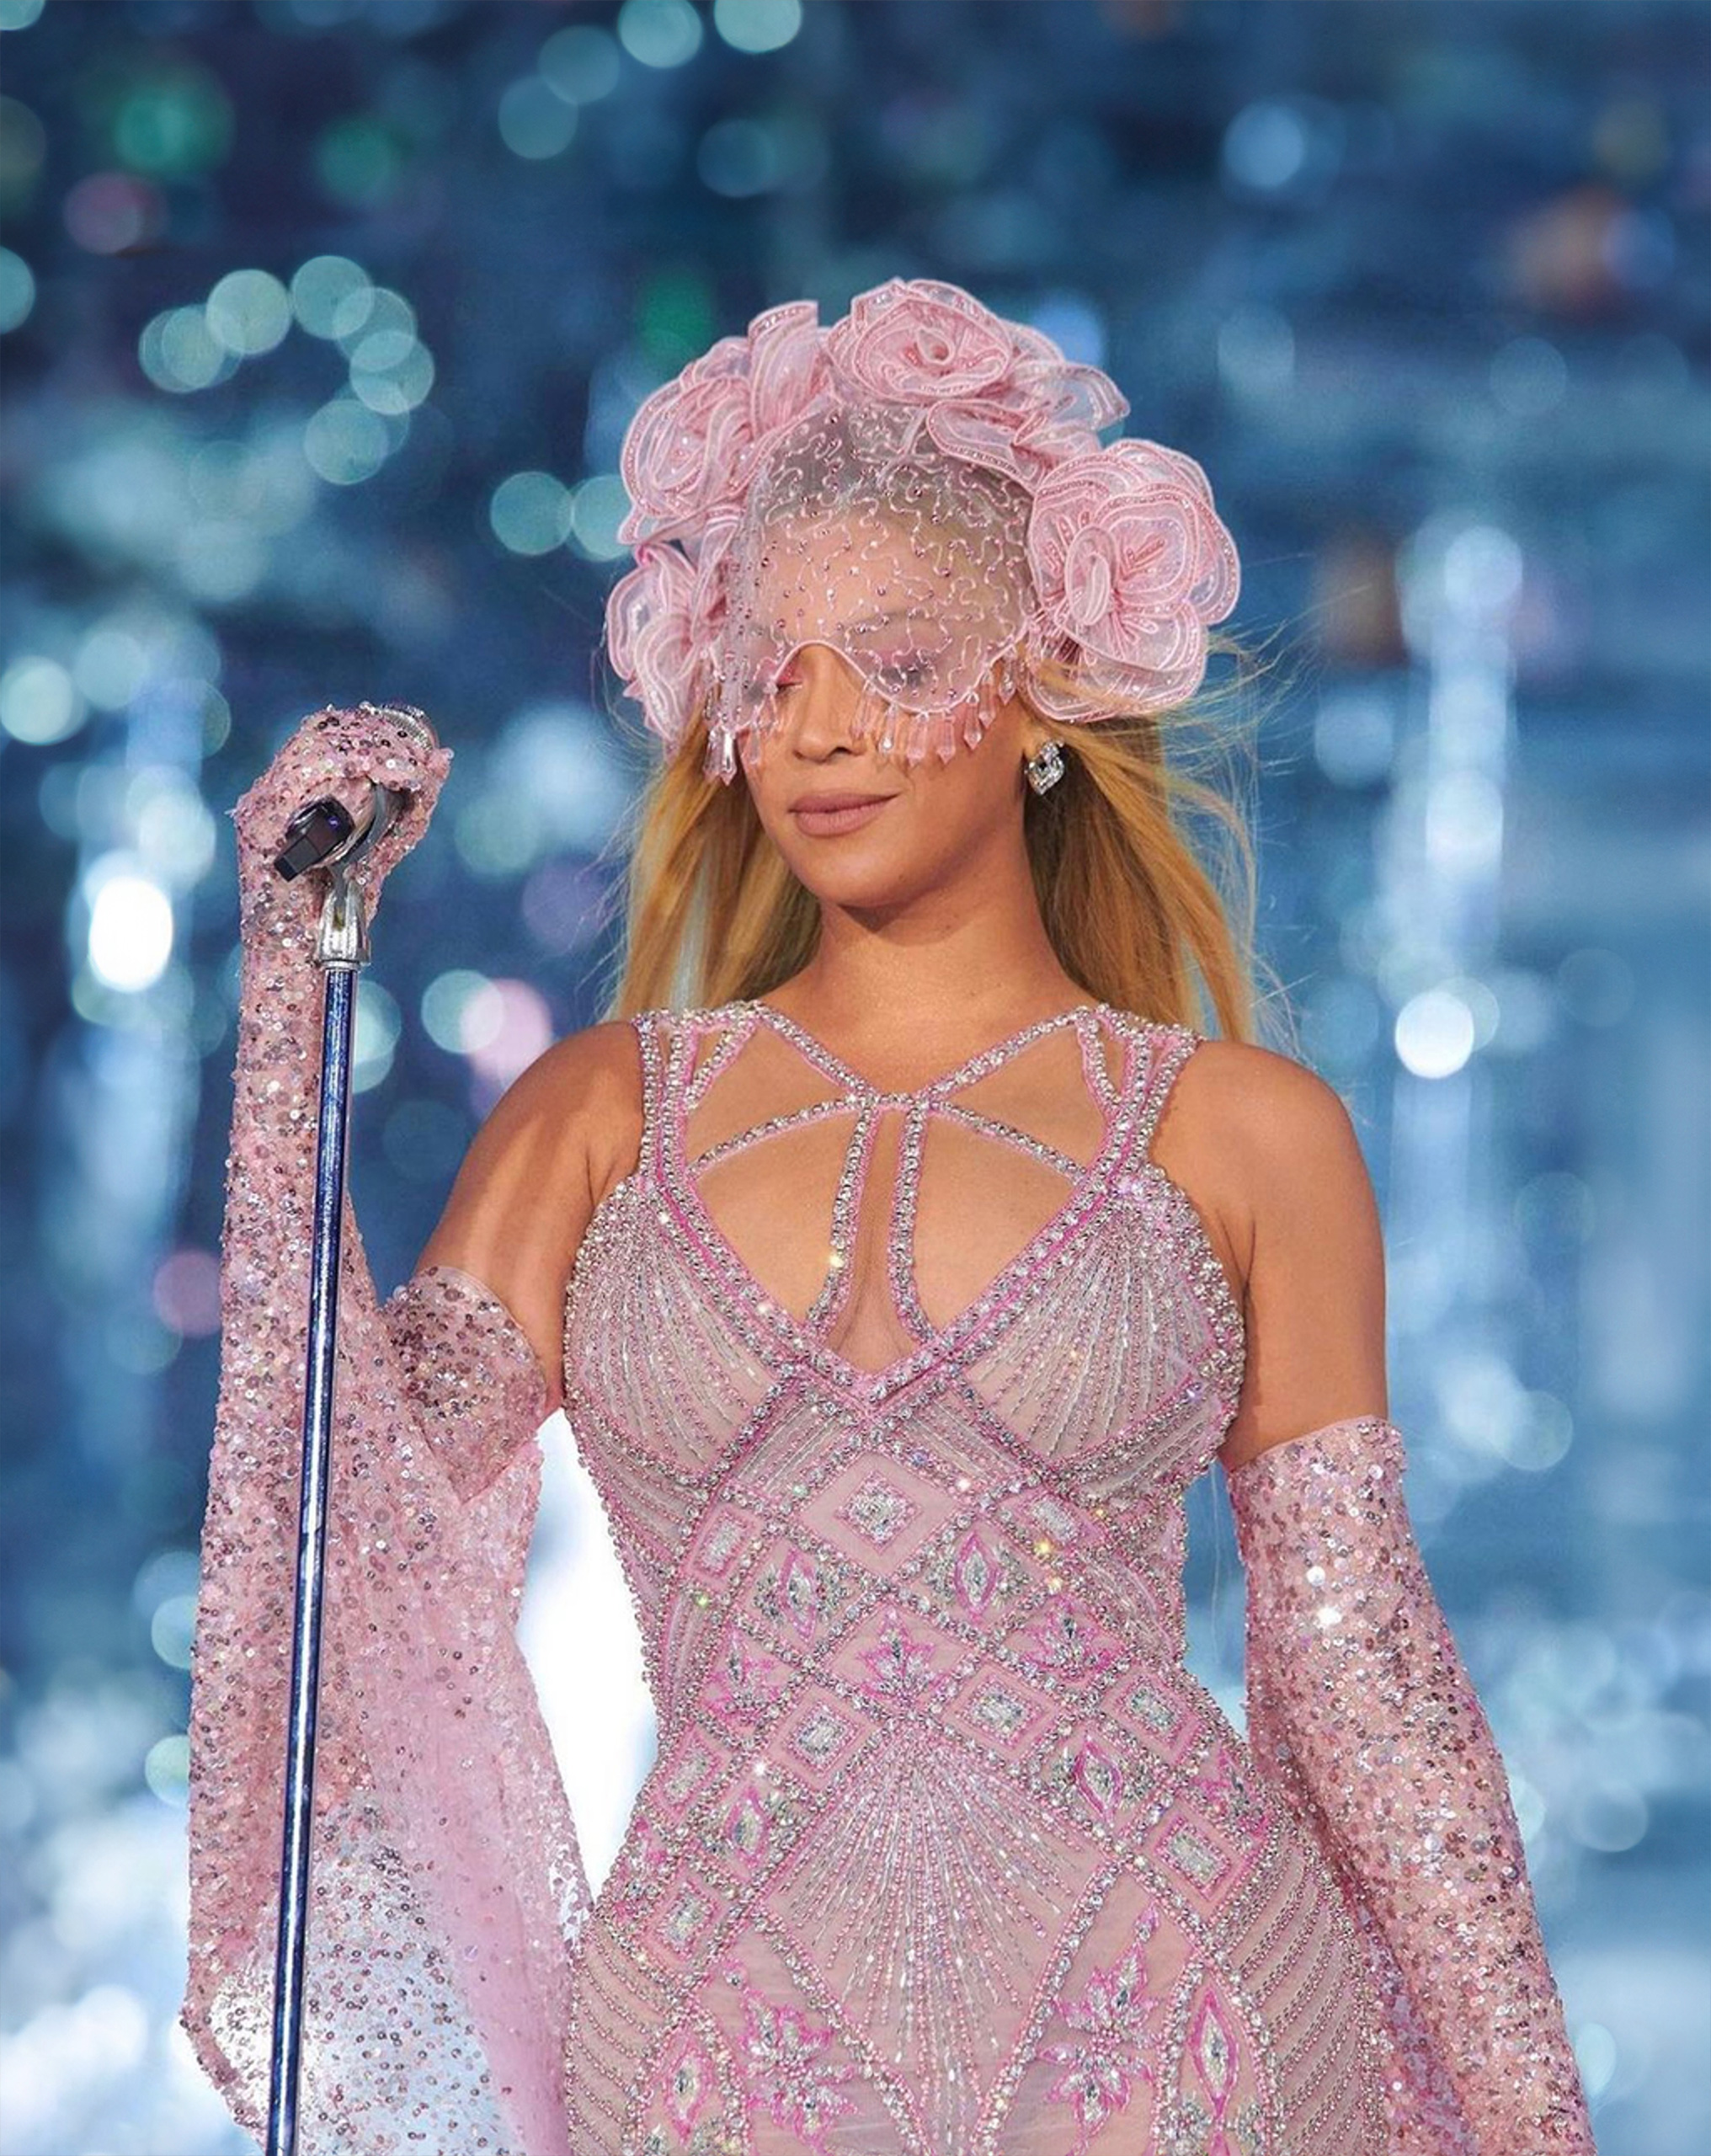 Georges-Hobeika-Jad-Hobeika-Beyonce-QueenB-Renaissance-Tour-Concert-Show-Couture-FW23-FALL-WINTERr-collection